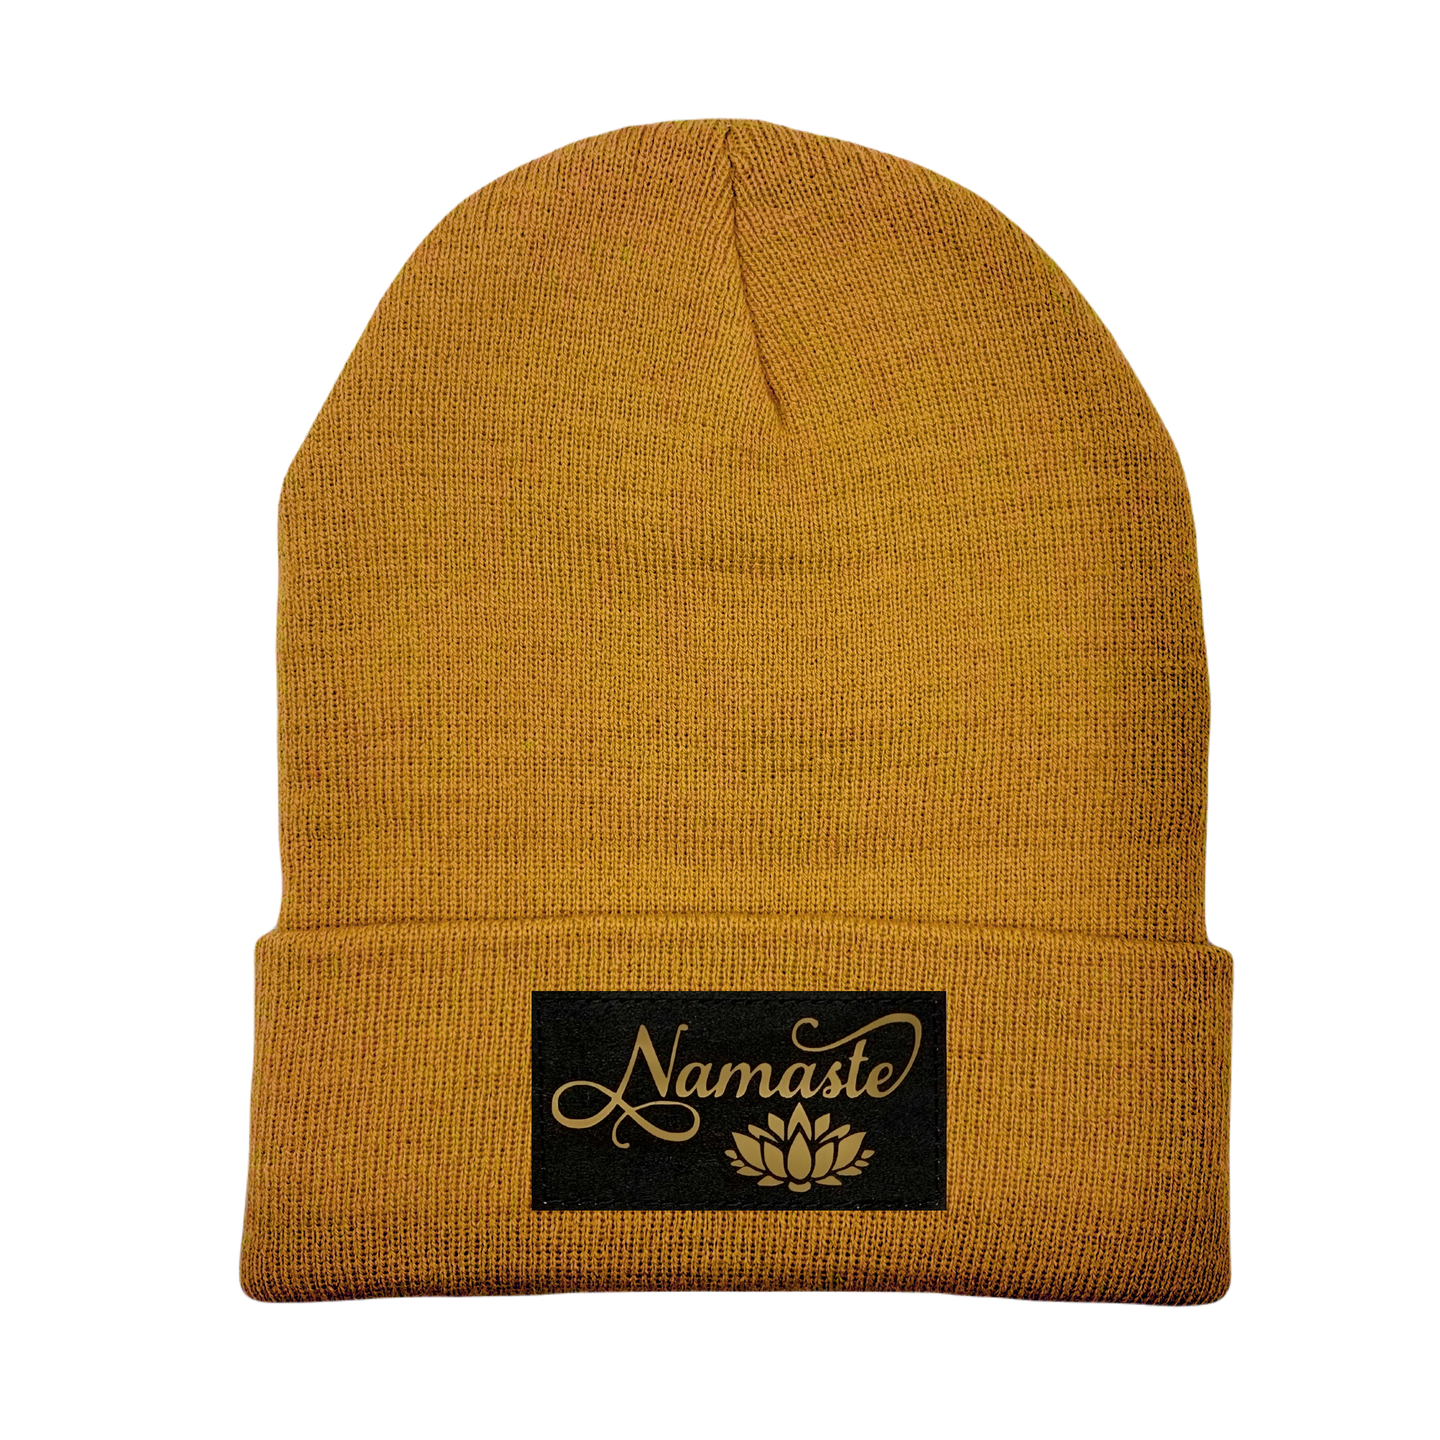 Beanie - Carmel Brown with Hand Made, Black/Gold Vegan Leather Namaste Lotus Patch by Buddha Gear 